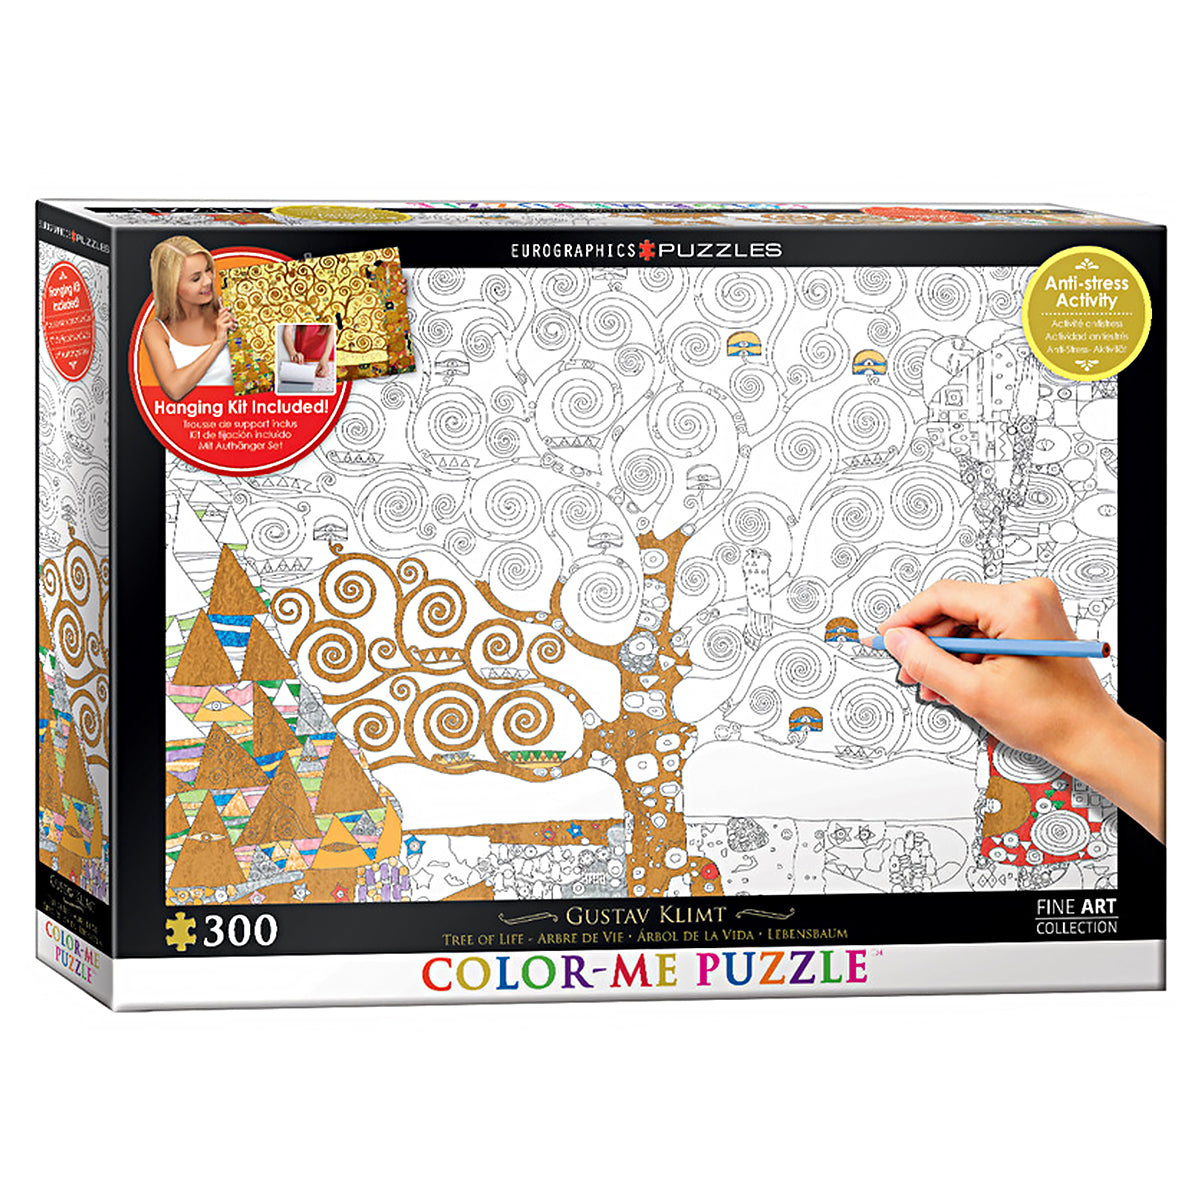 Colouring jigsaw puzzle for adults featuring iconic 'Tree Of Life' artwork by Gustav Klimt